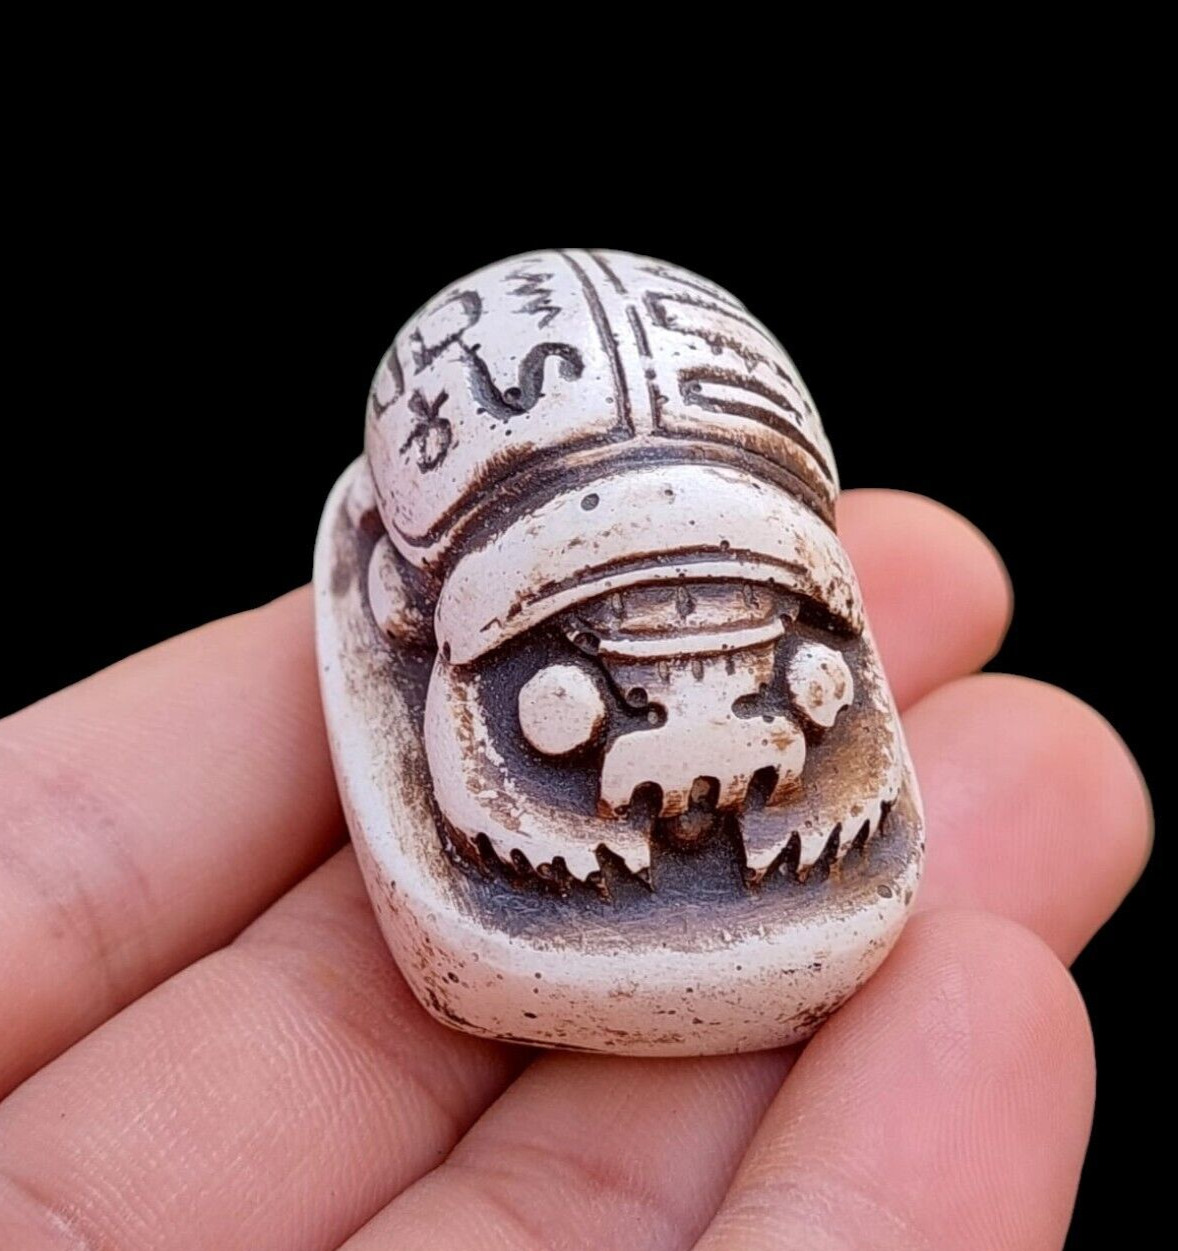 MUSEUM OF PHARAONIC SCARAB AMULETS RARE BEETLE RELIC OF EGYPTIAN CIVILIZATION BC